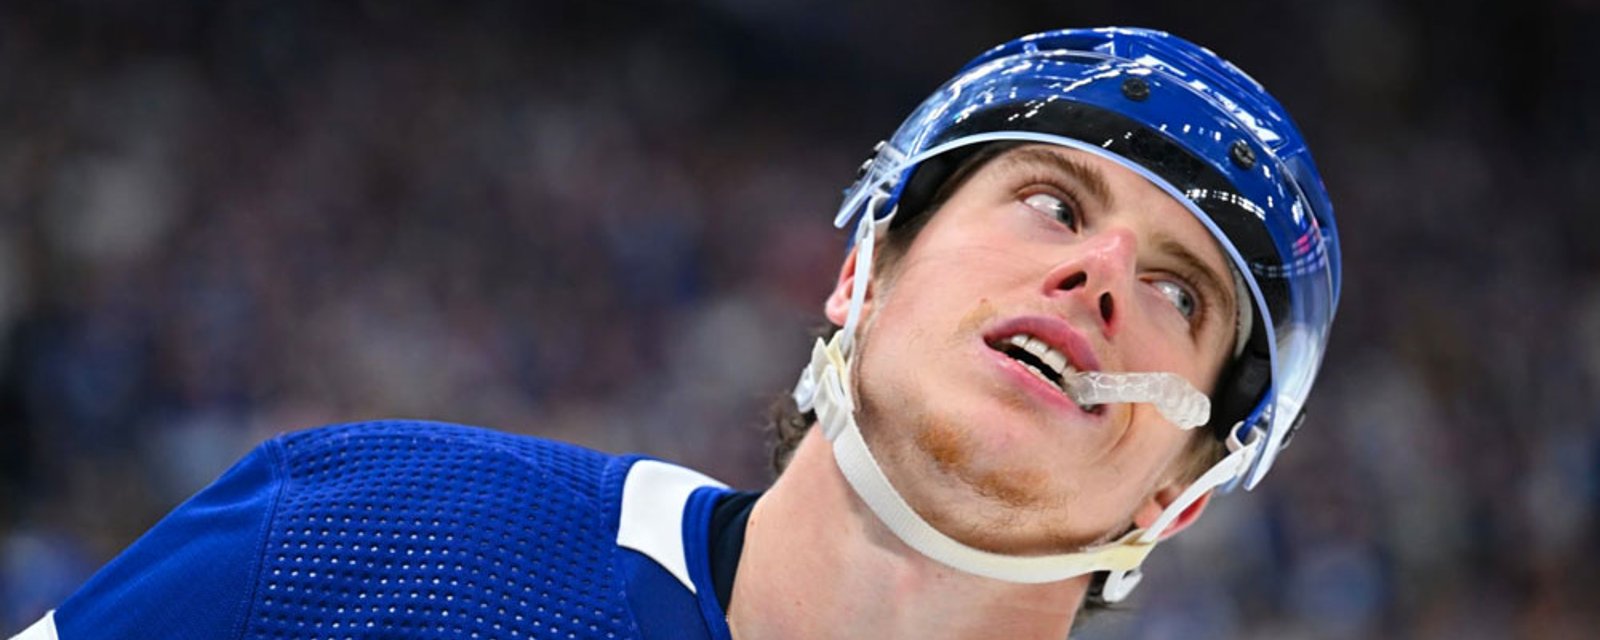 Fans discover a secret about Mitch Marner from last night's pre-season action